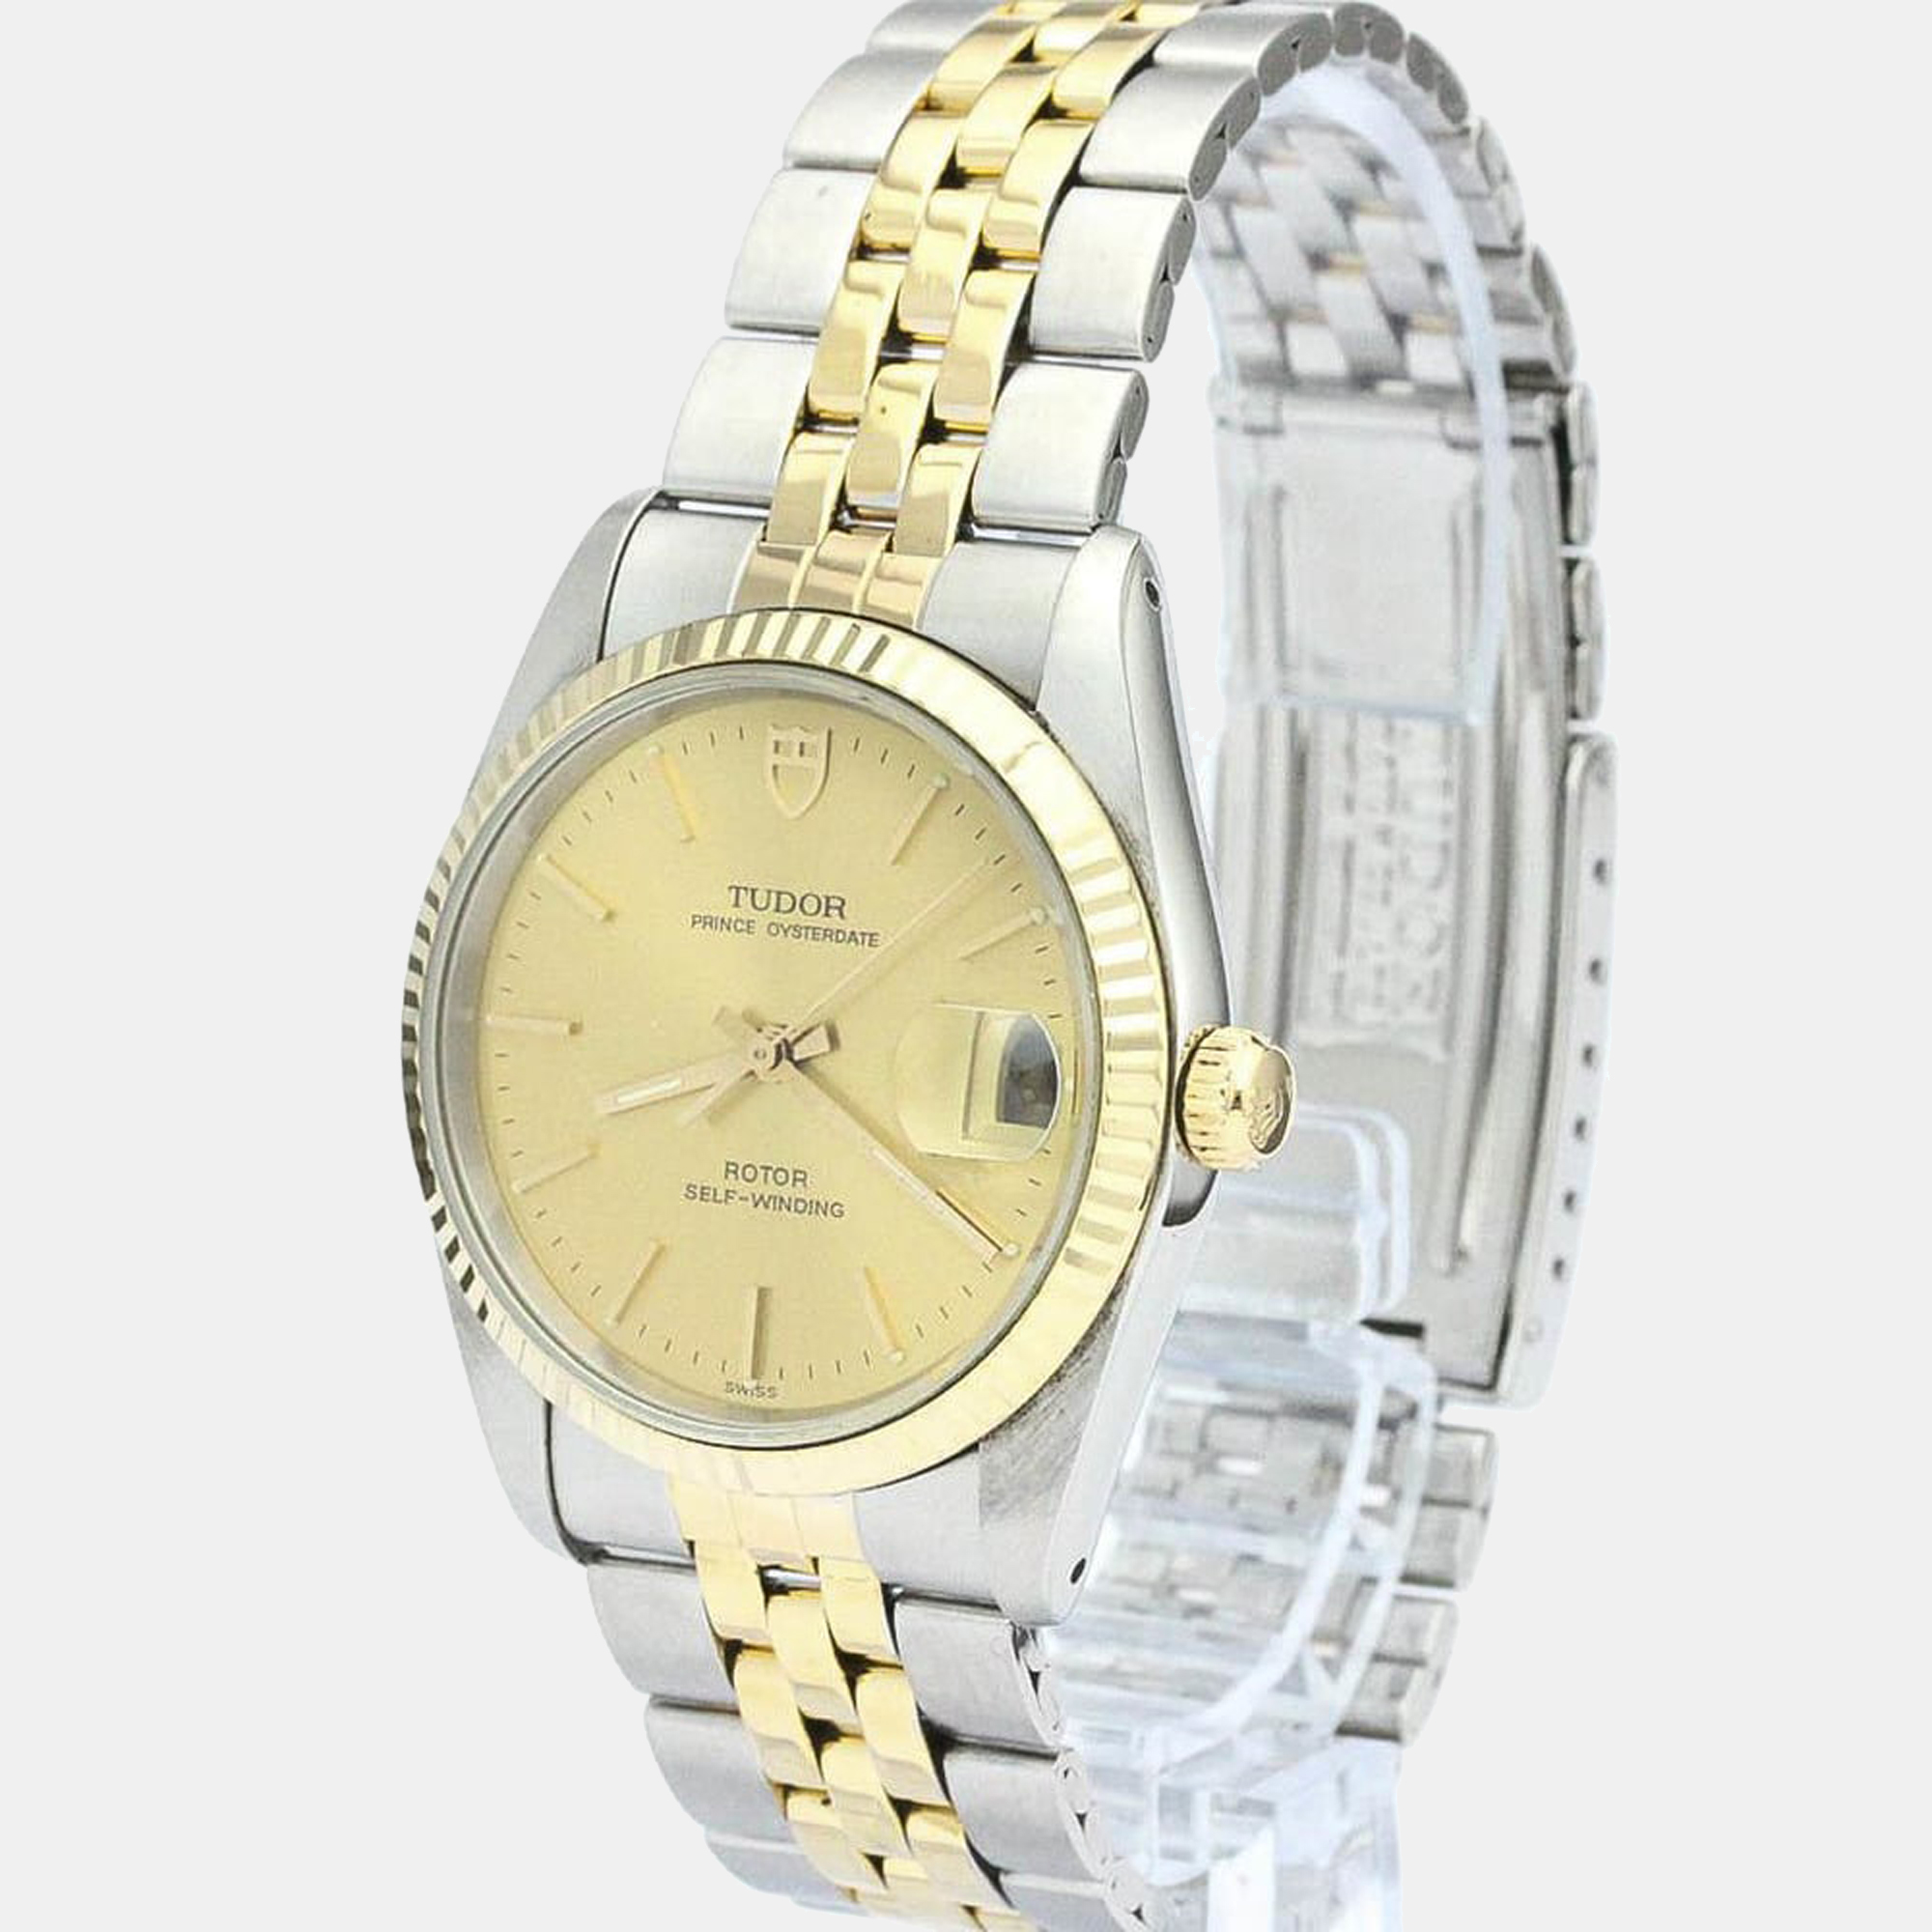 Tudor Champagne 18K Yellow Gold And Stainless Steel Prince Oysterdate 74033 Men's Wristwatch 34 Mm